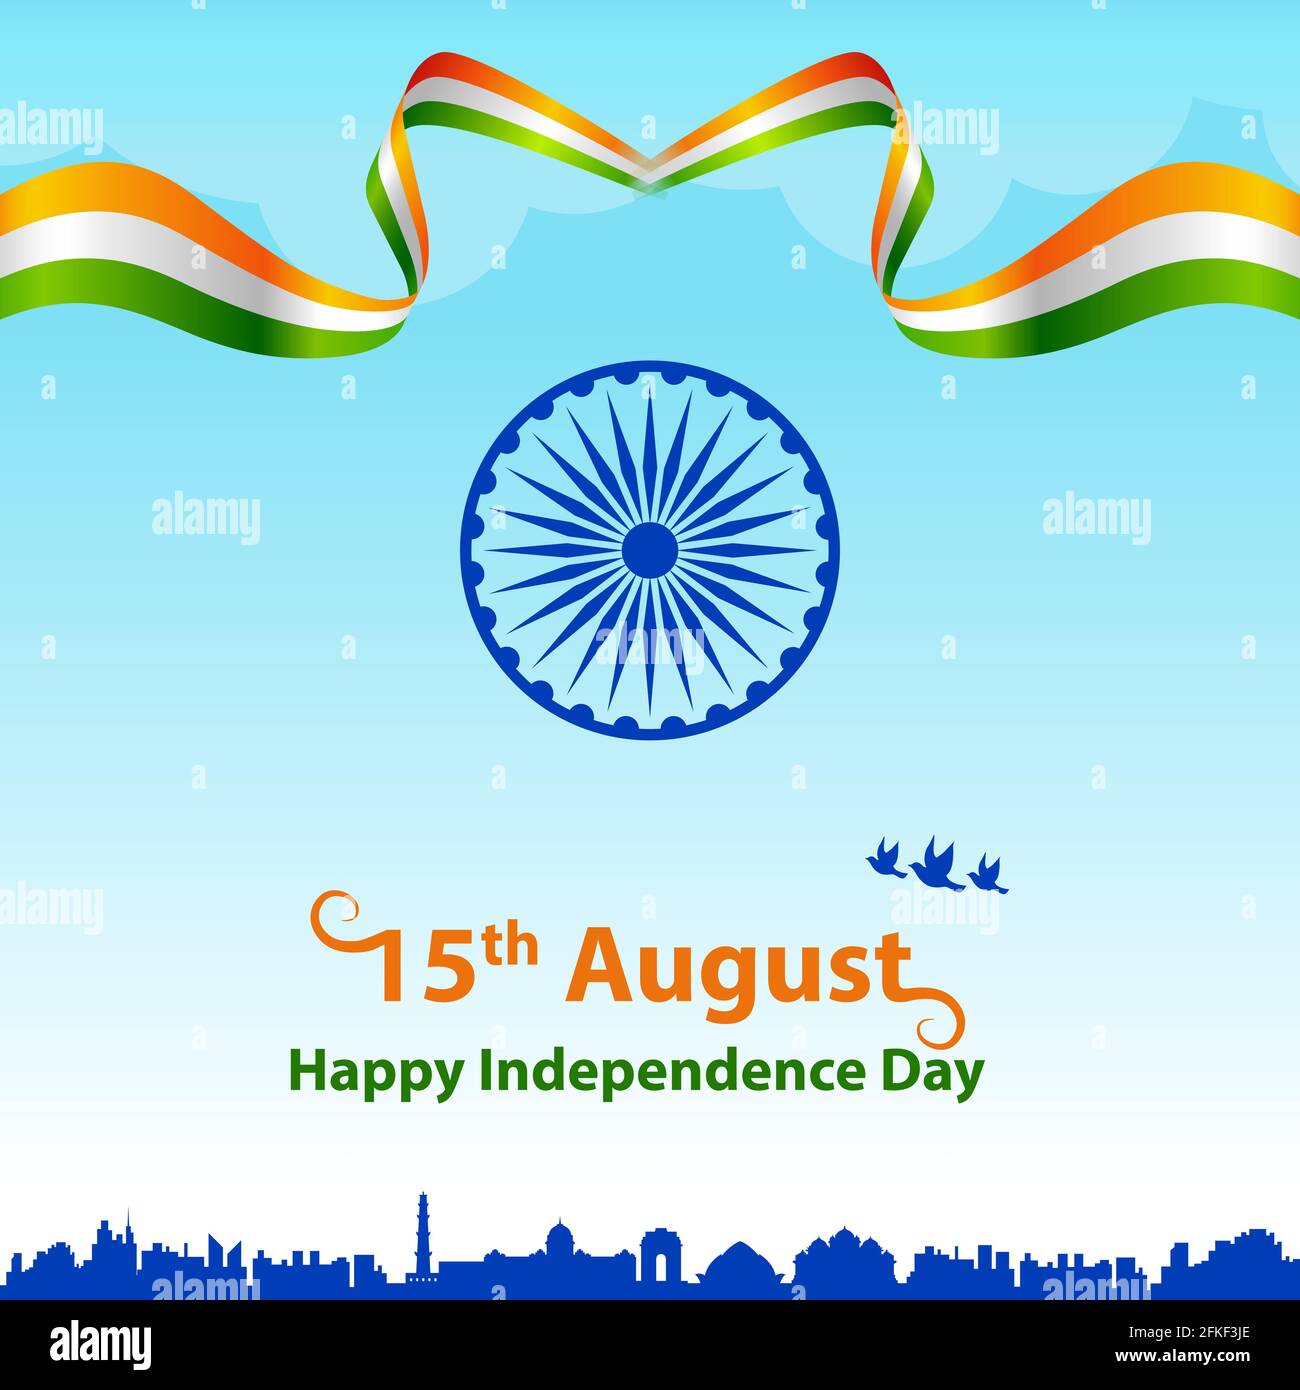 Happy Independence Day India with tricolor flag greeting vector ...